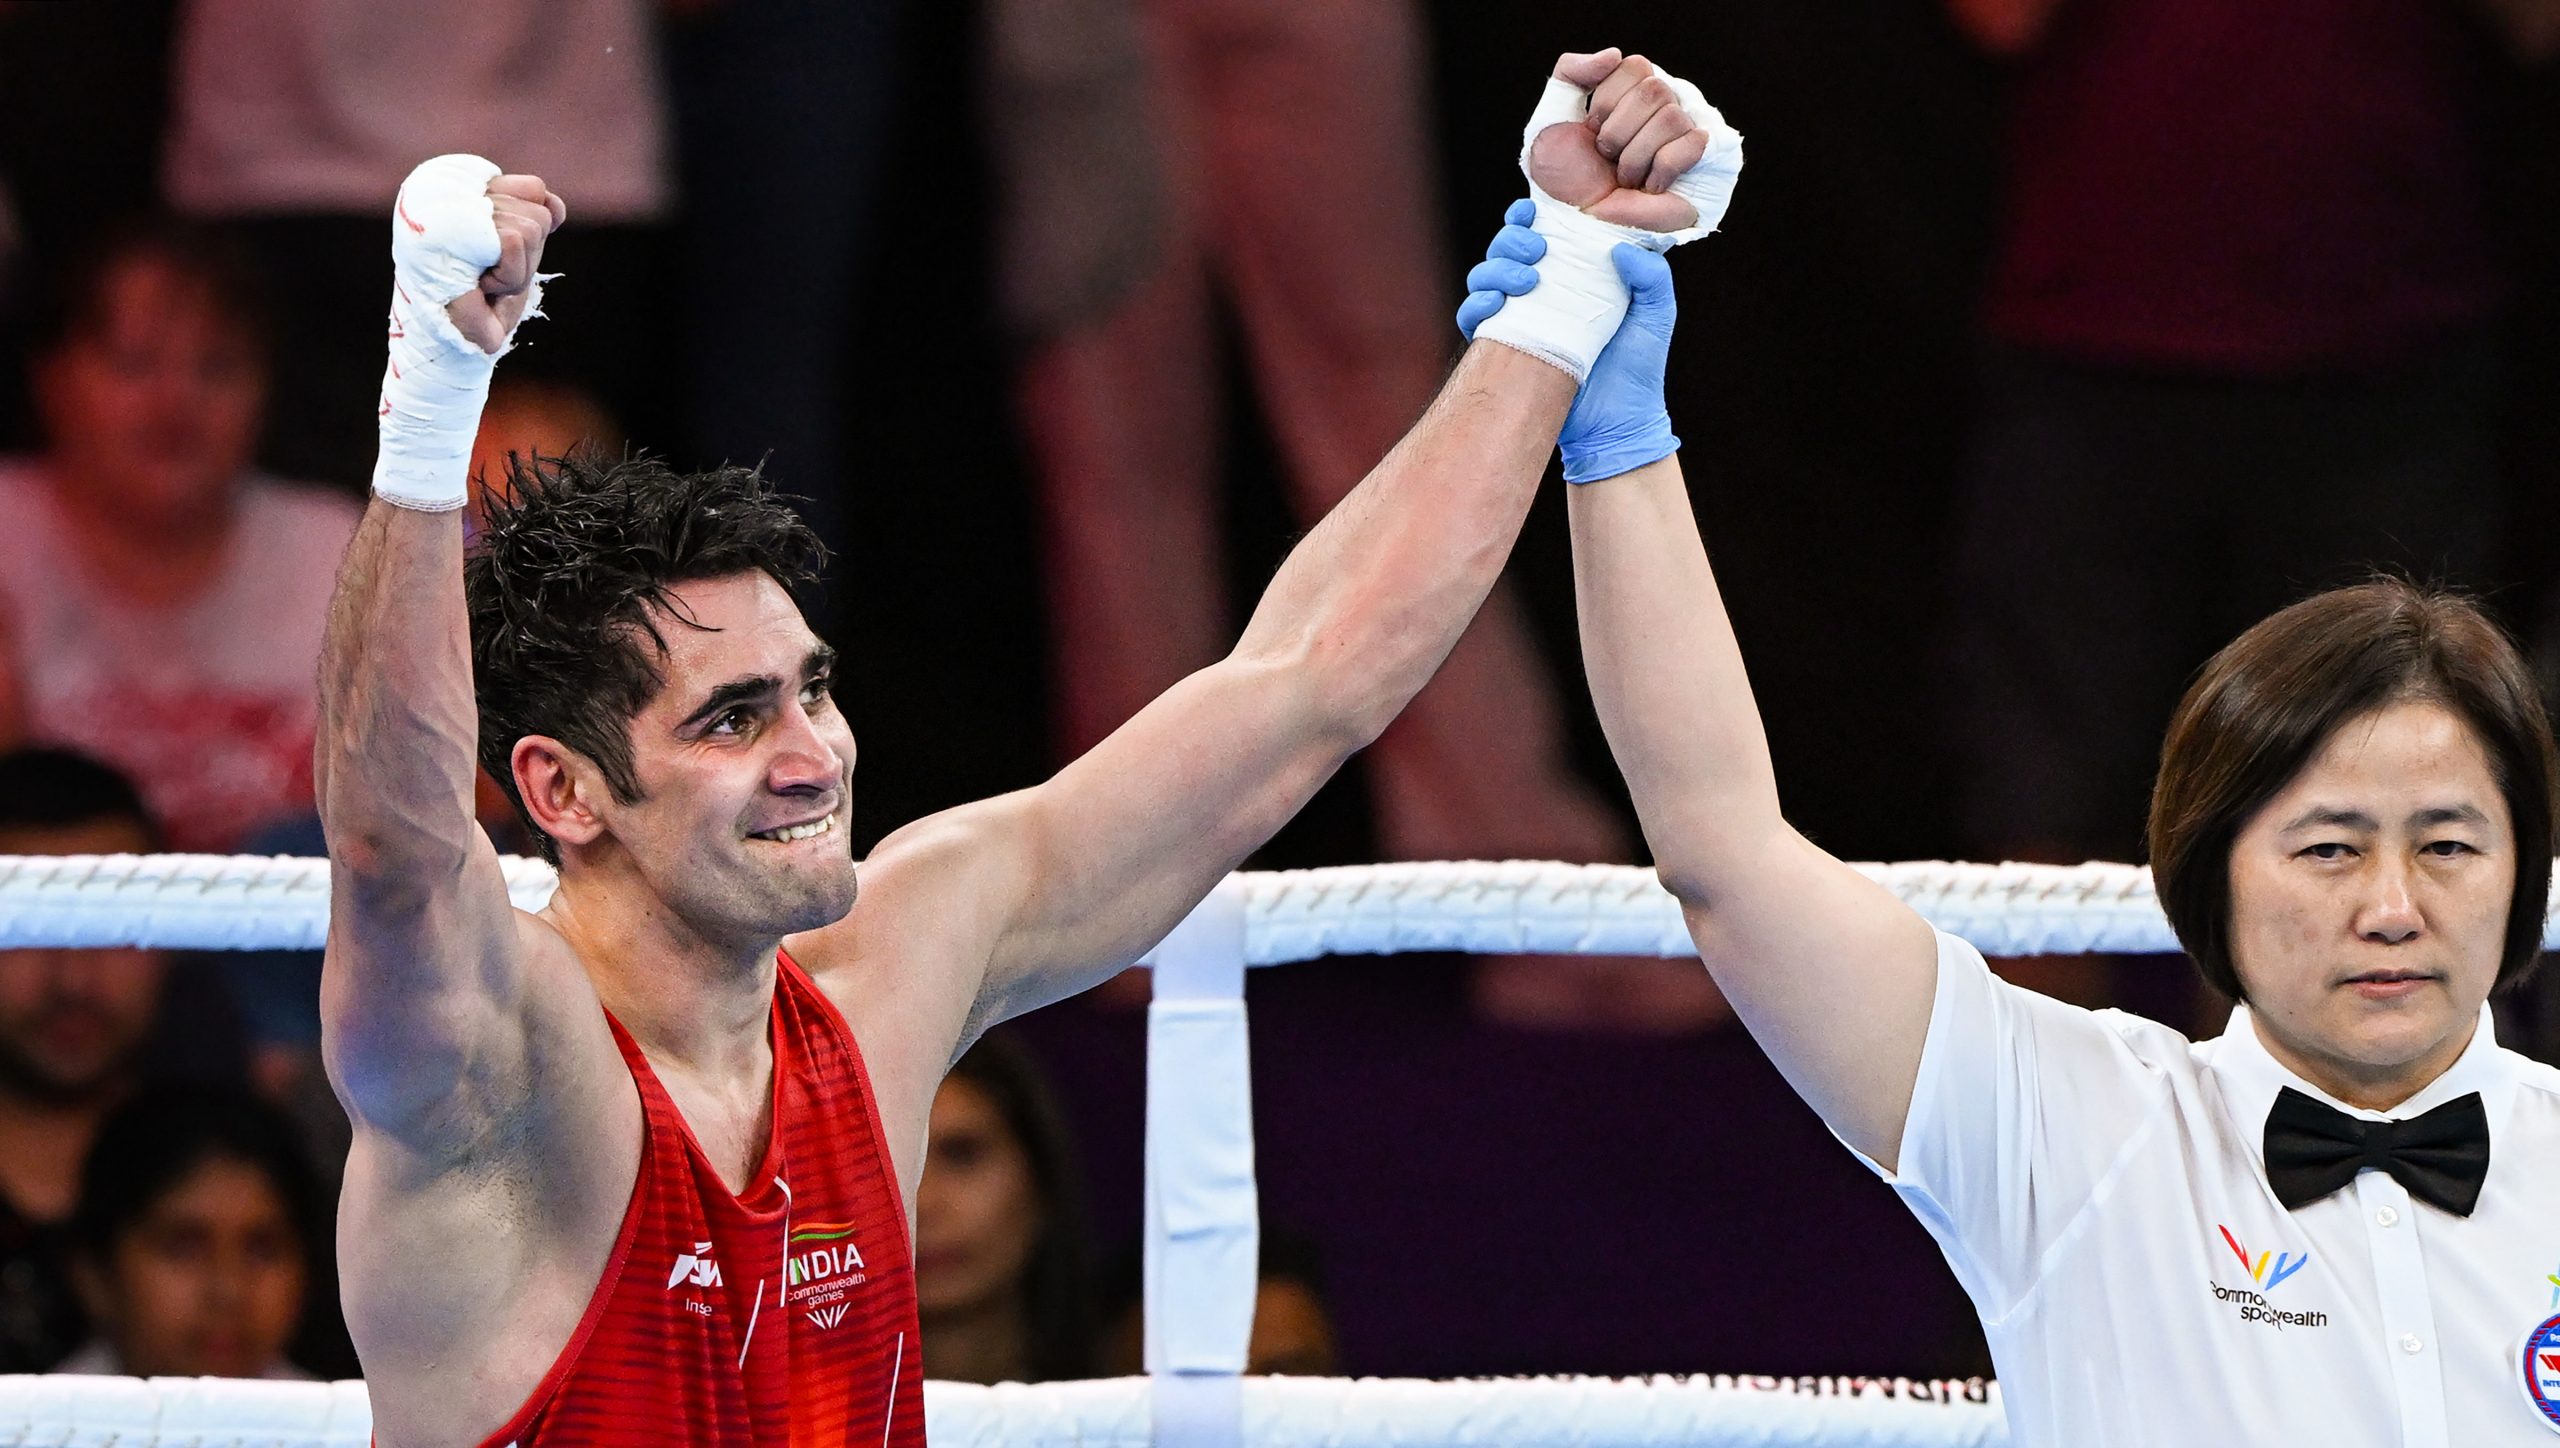 Commonwealth Games 2022: Rohit Tokas wins bronze medal in boxing